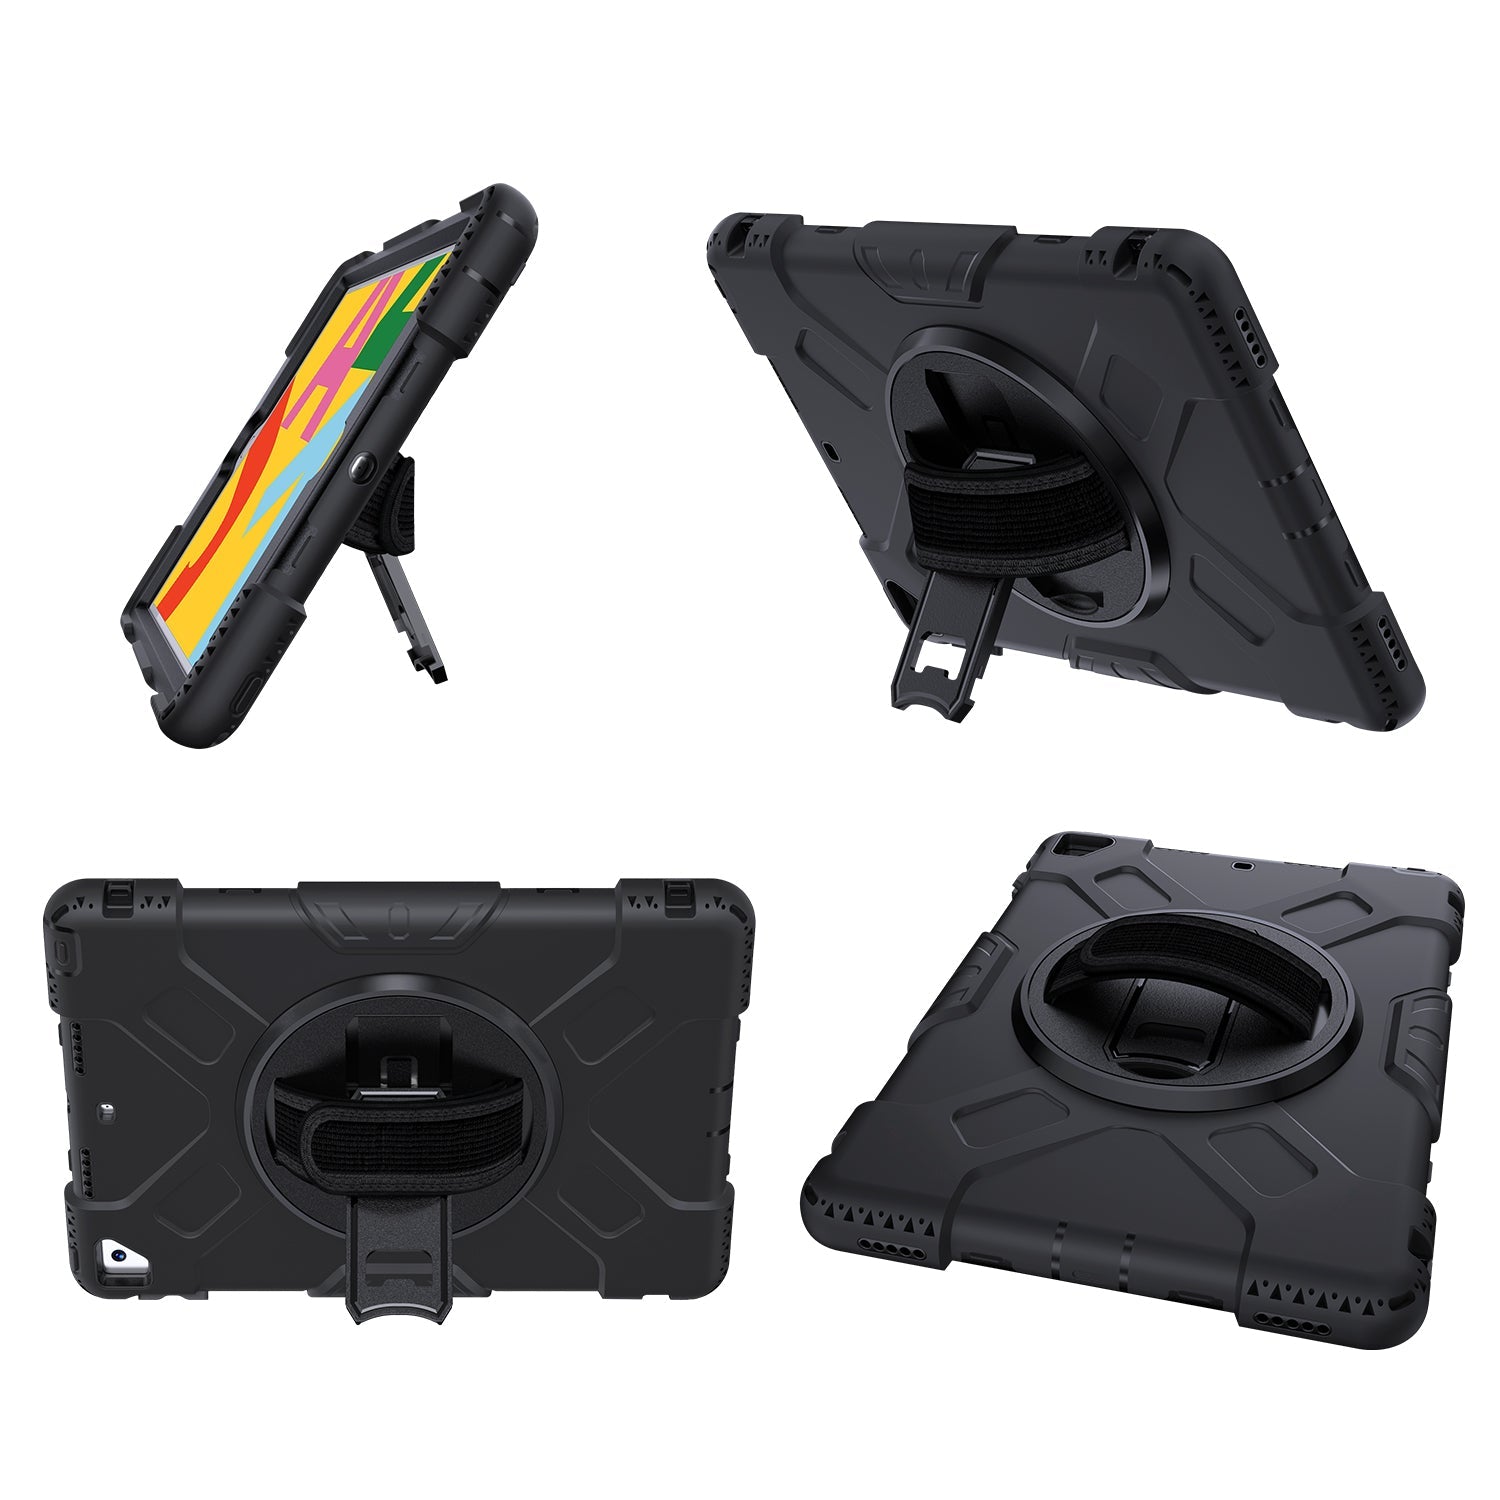 Tough On iPad Air 3 10.5" 2019 Case Rugged Protection